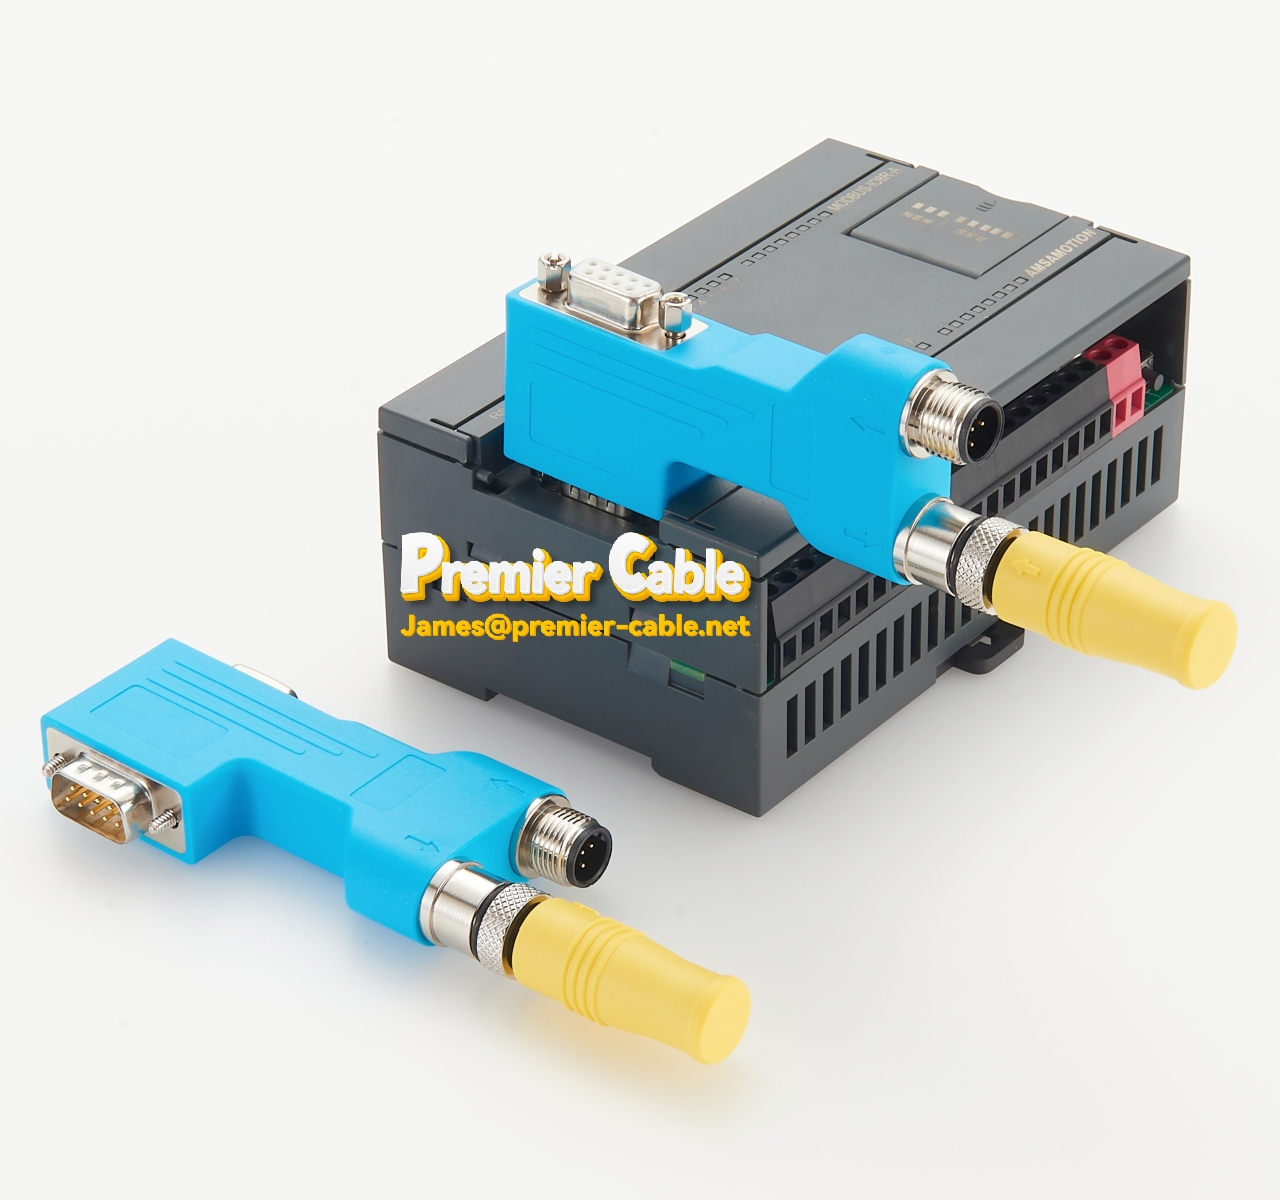 Profibus 90 Degree D-Sub to M12 Connector with Programming Port